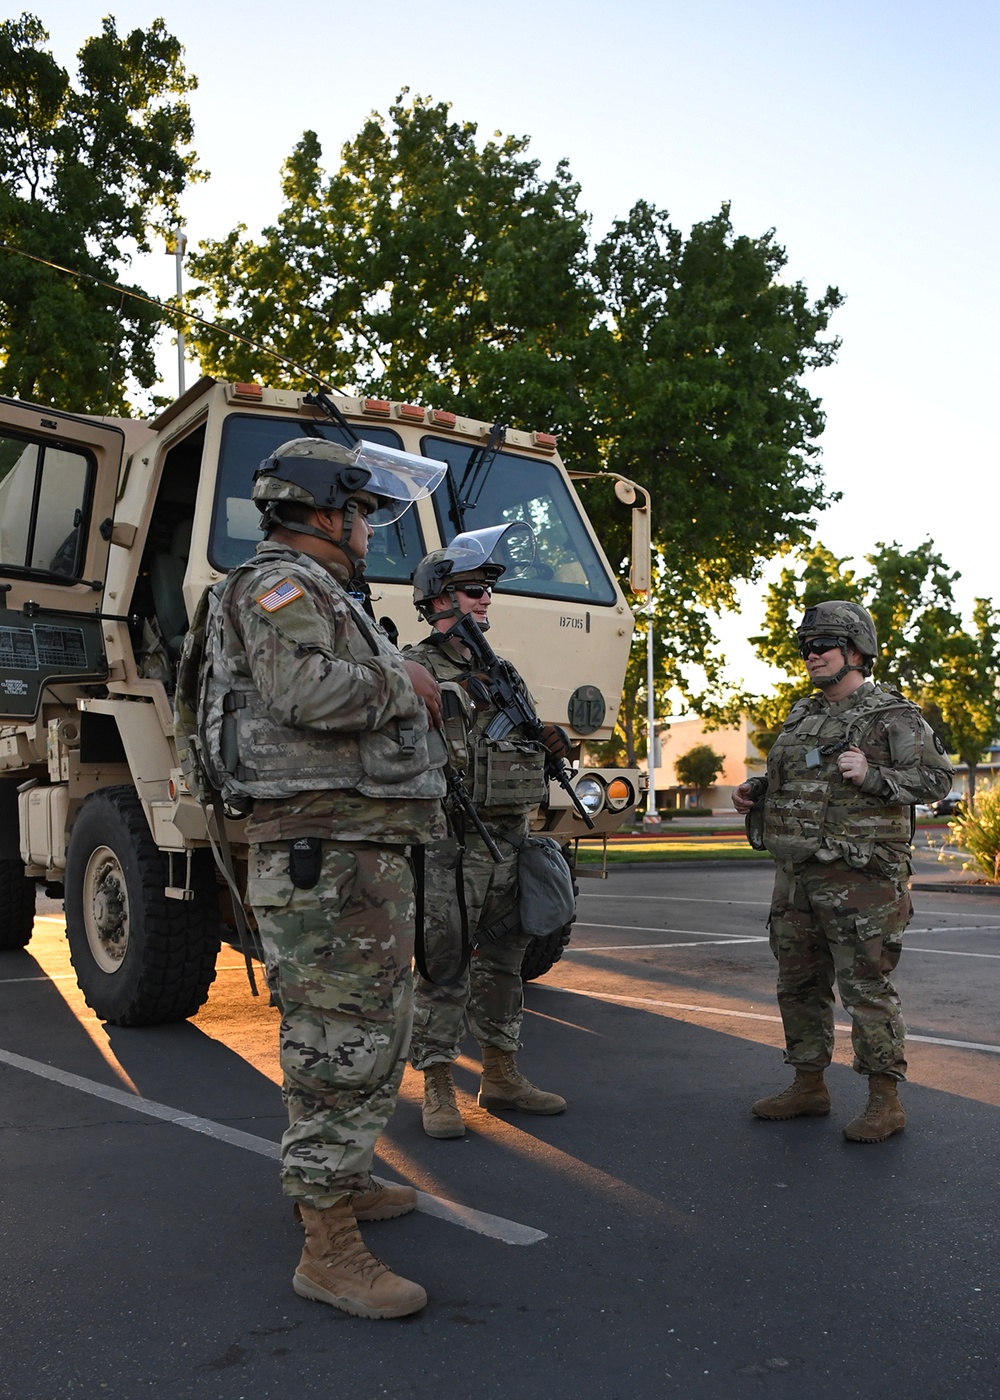 Chaplains support Cal Guard service members during civil unrest mission